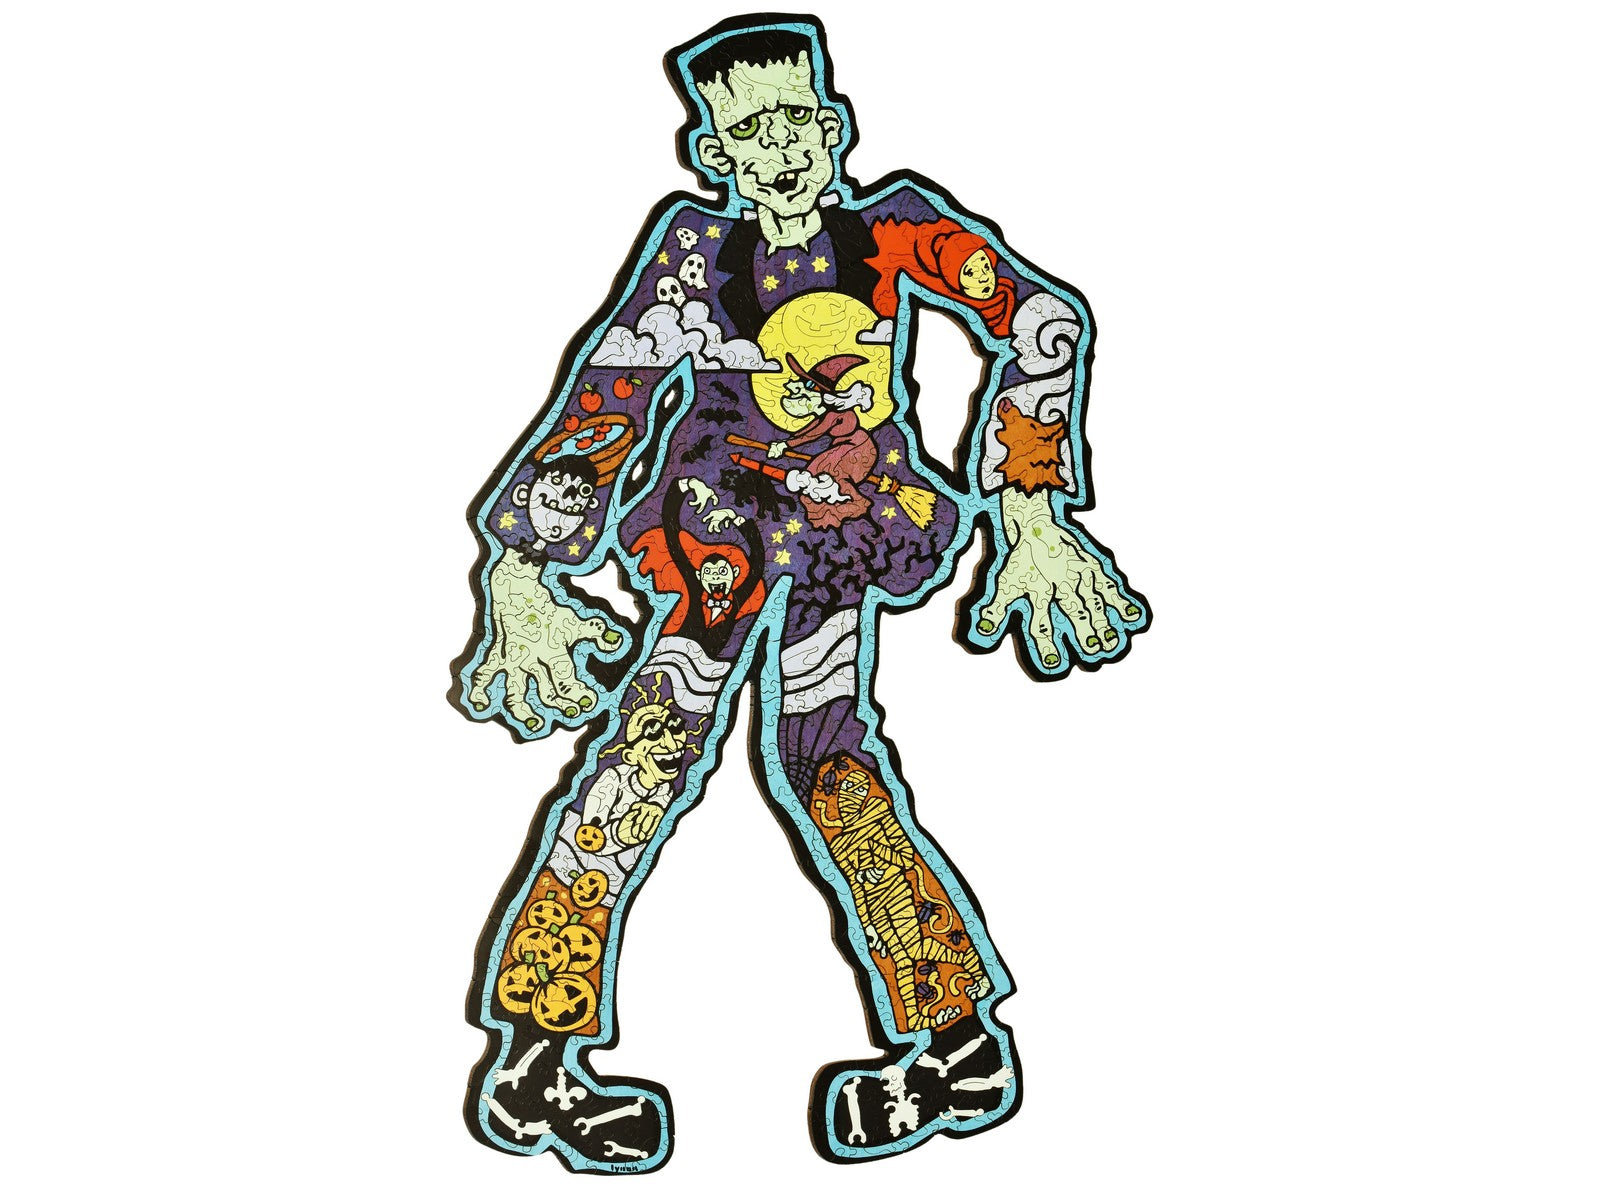 The front of the puzzle, Frankenstein, which shows a cartoon drawing of the monster Frankenstein.